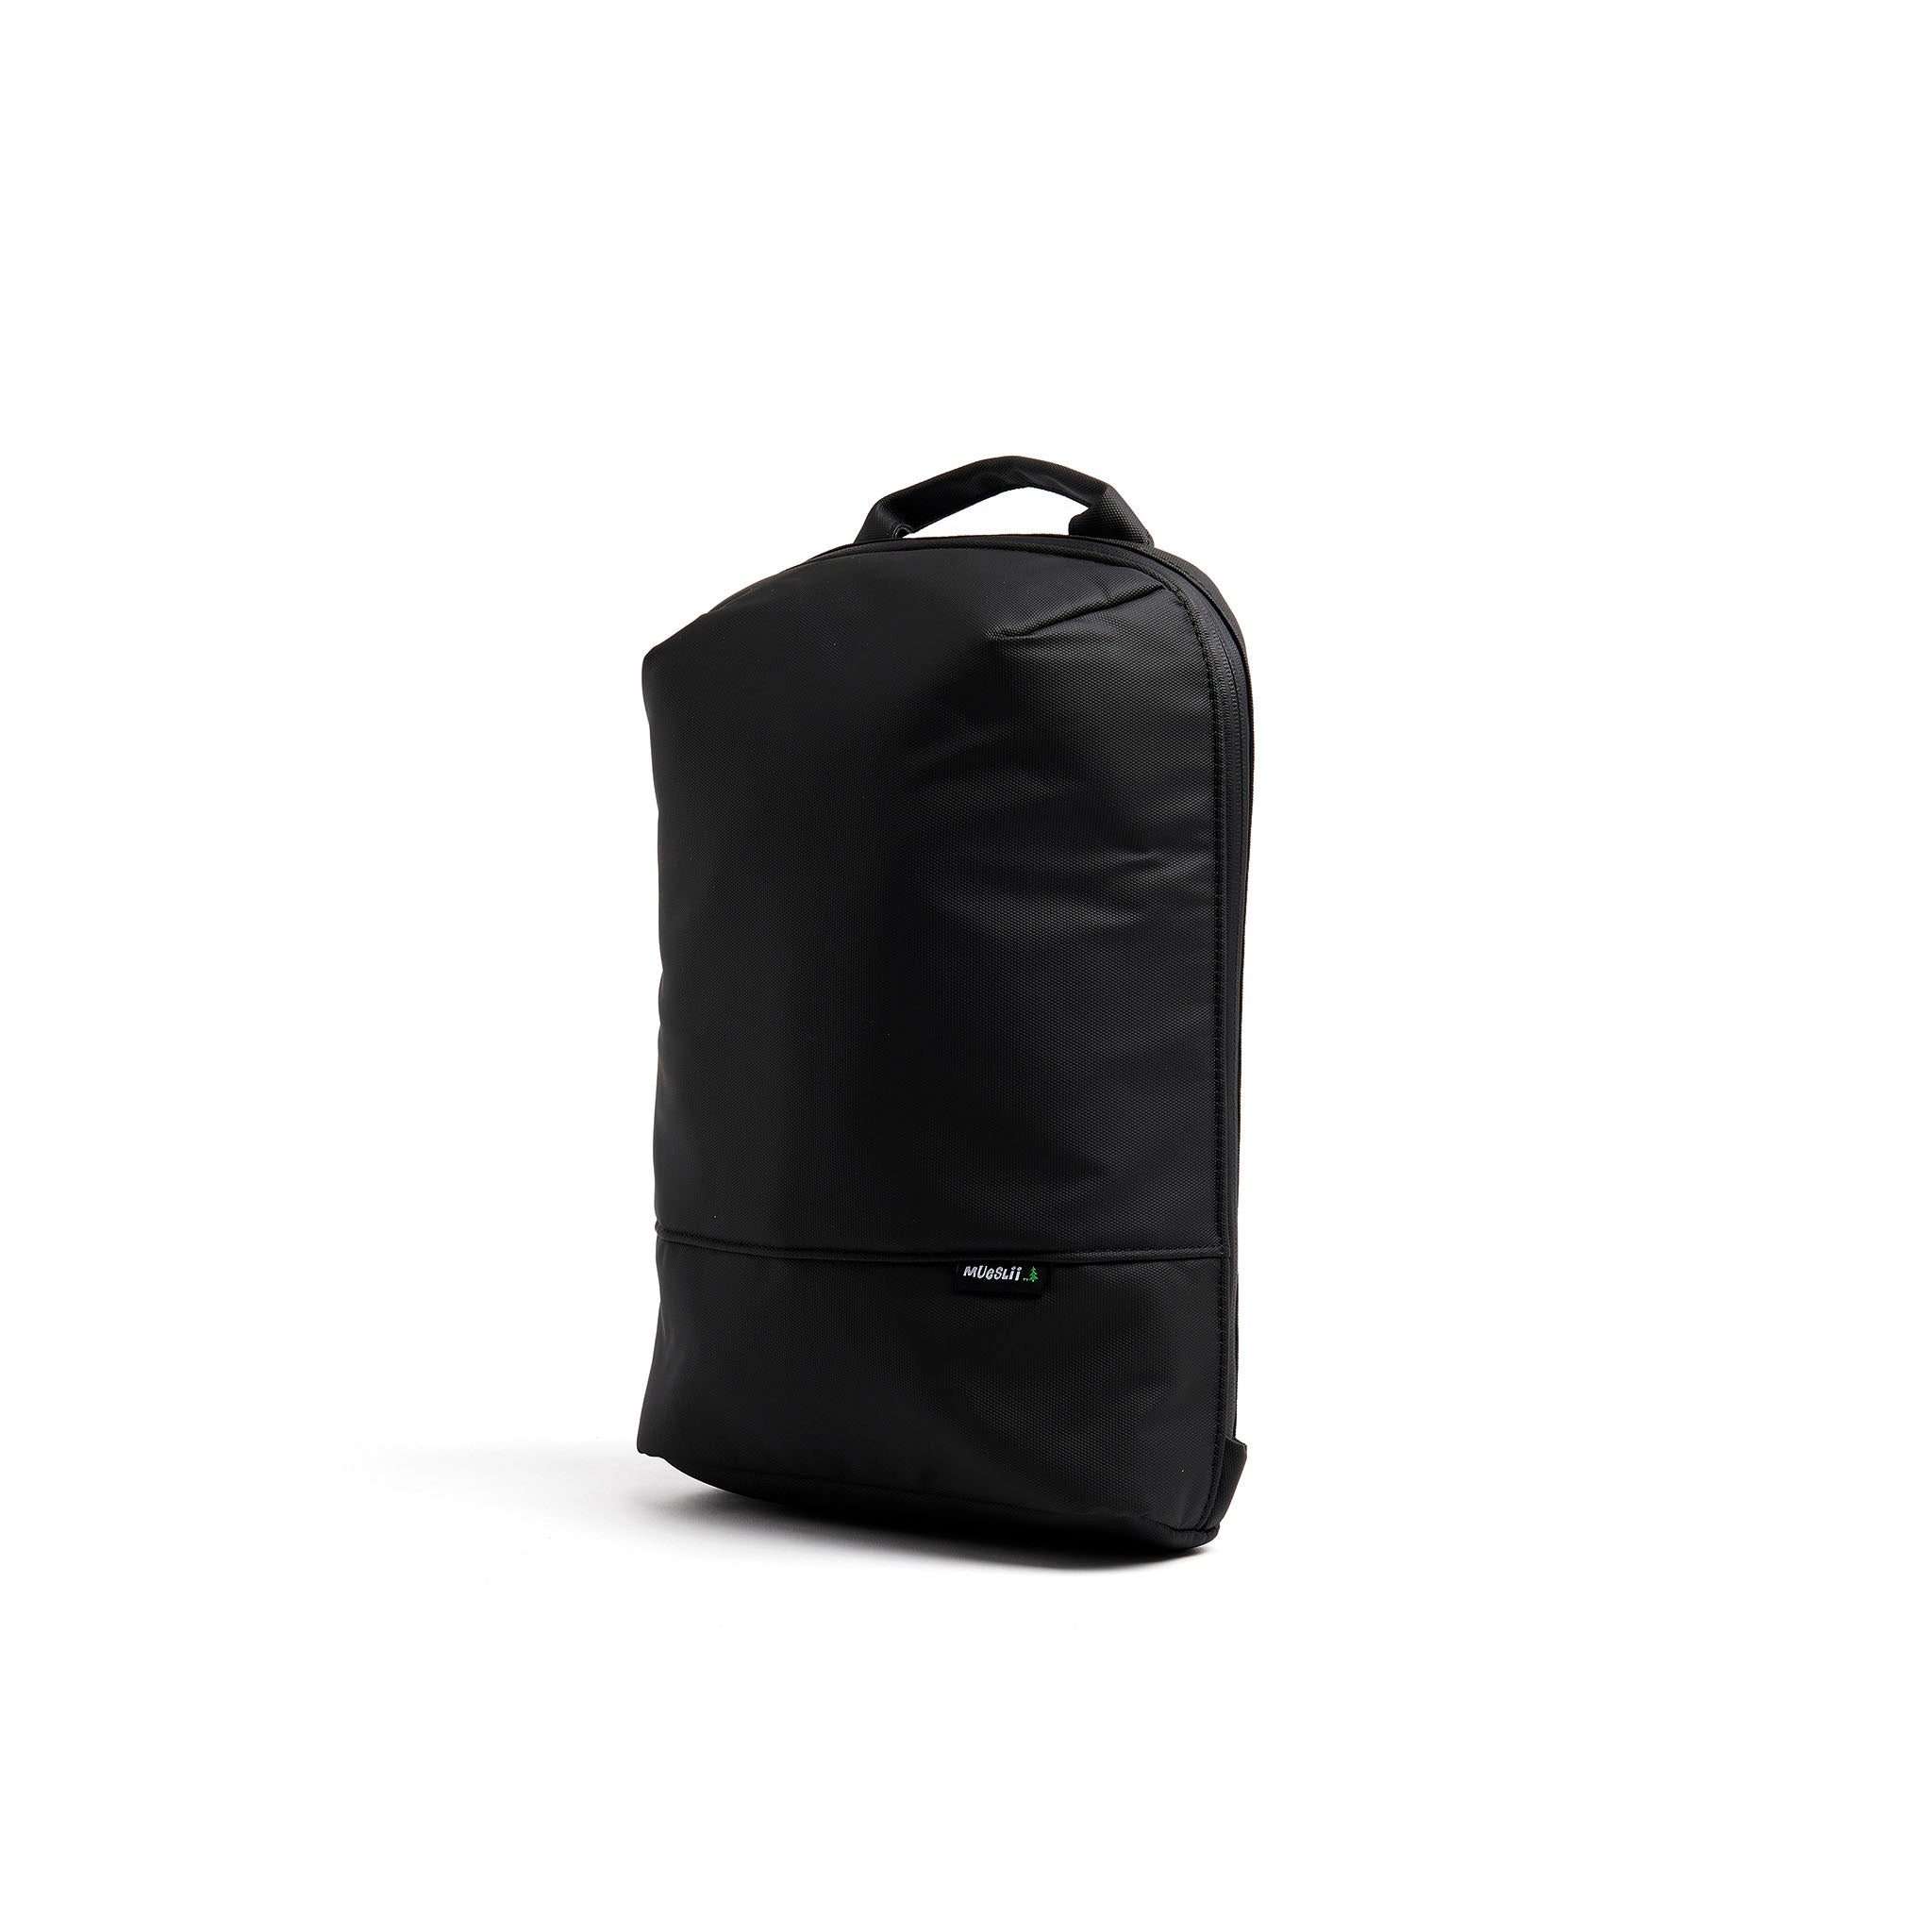 Mueslii small backpack, made of PU coated waterproof nylon, with a laptop compartment, color black, side view.